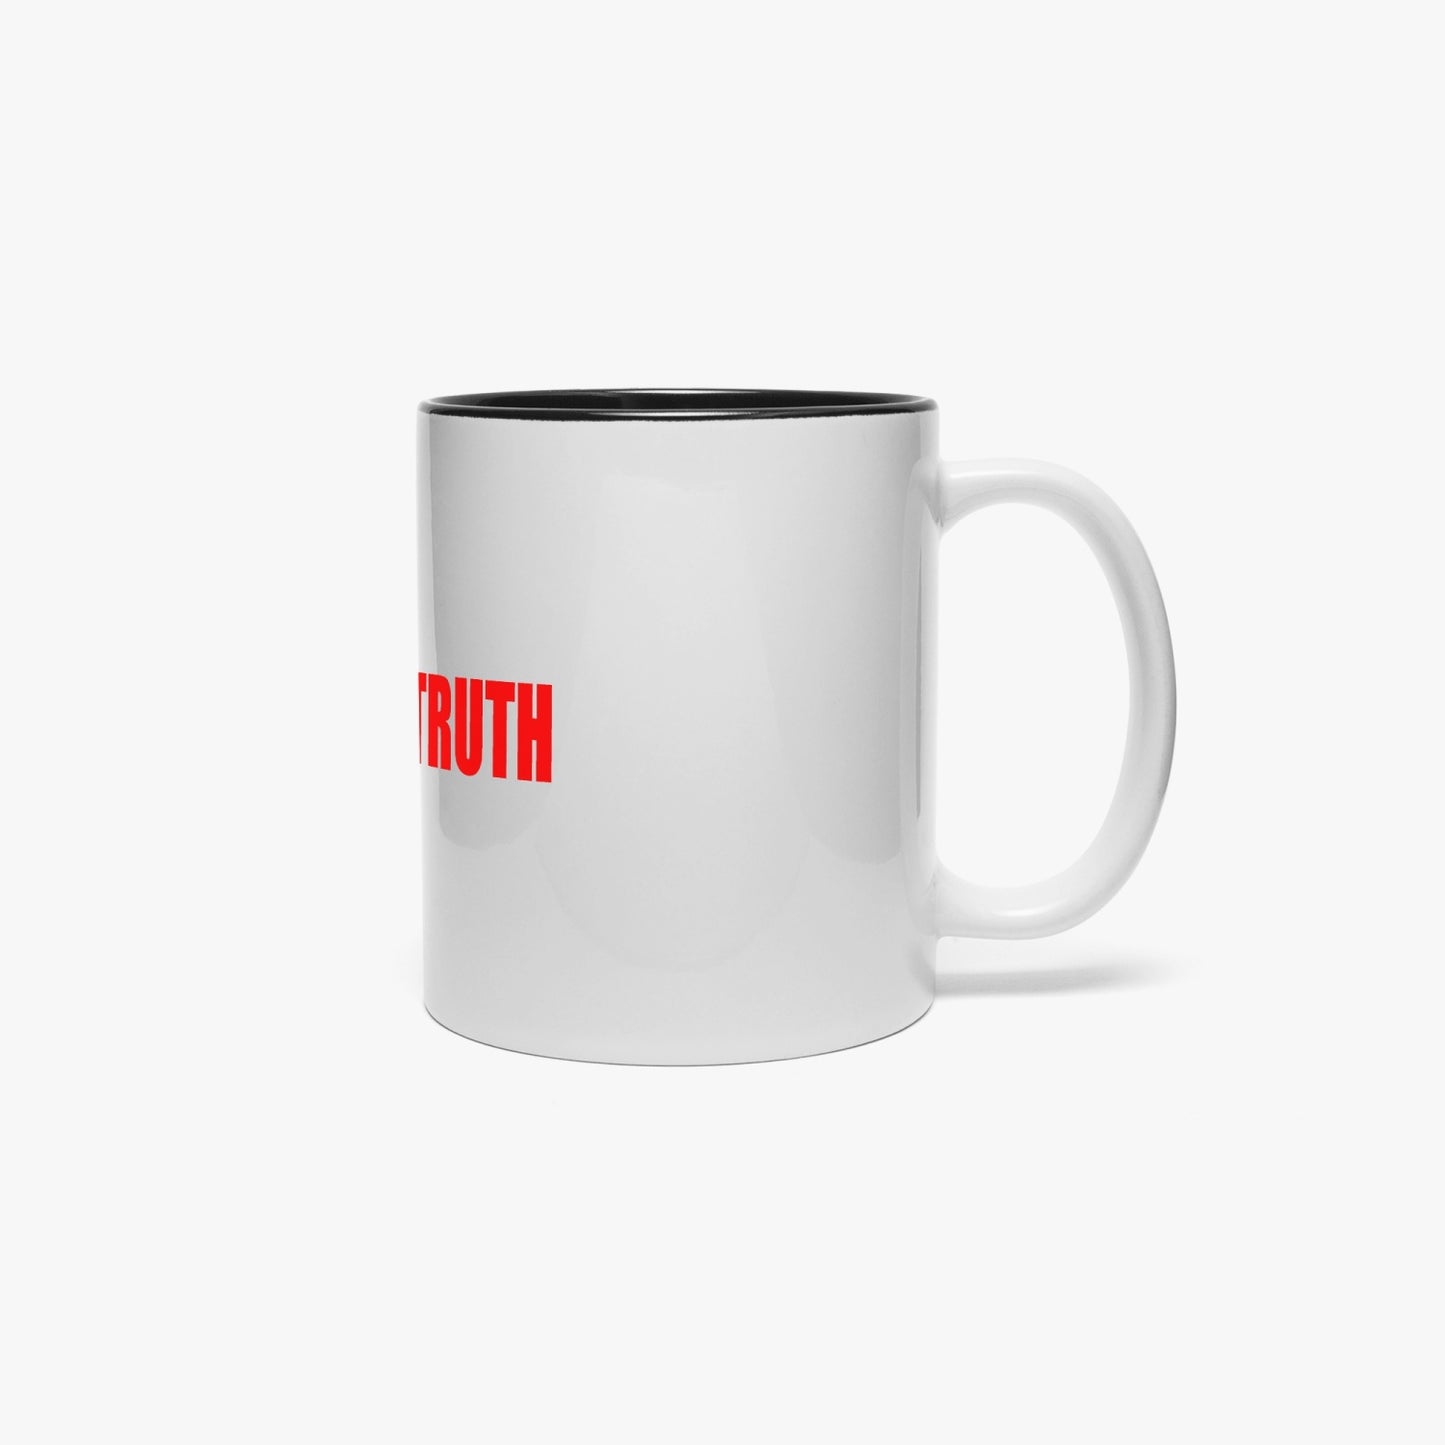 TELL THE TRUTH MUG WITH BLACK INSIDE